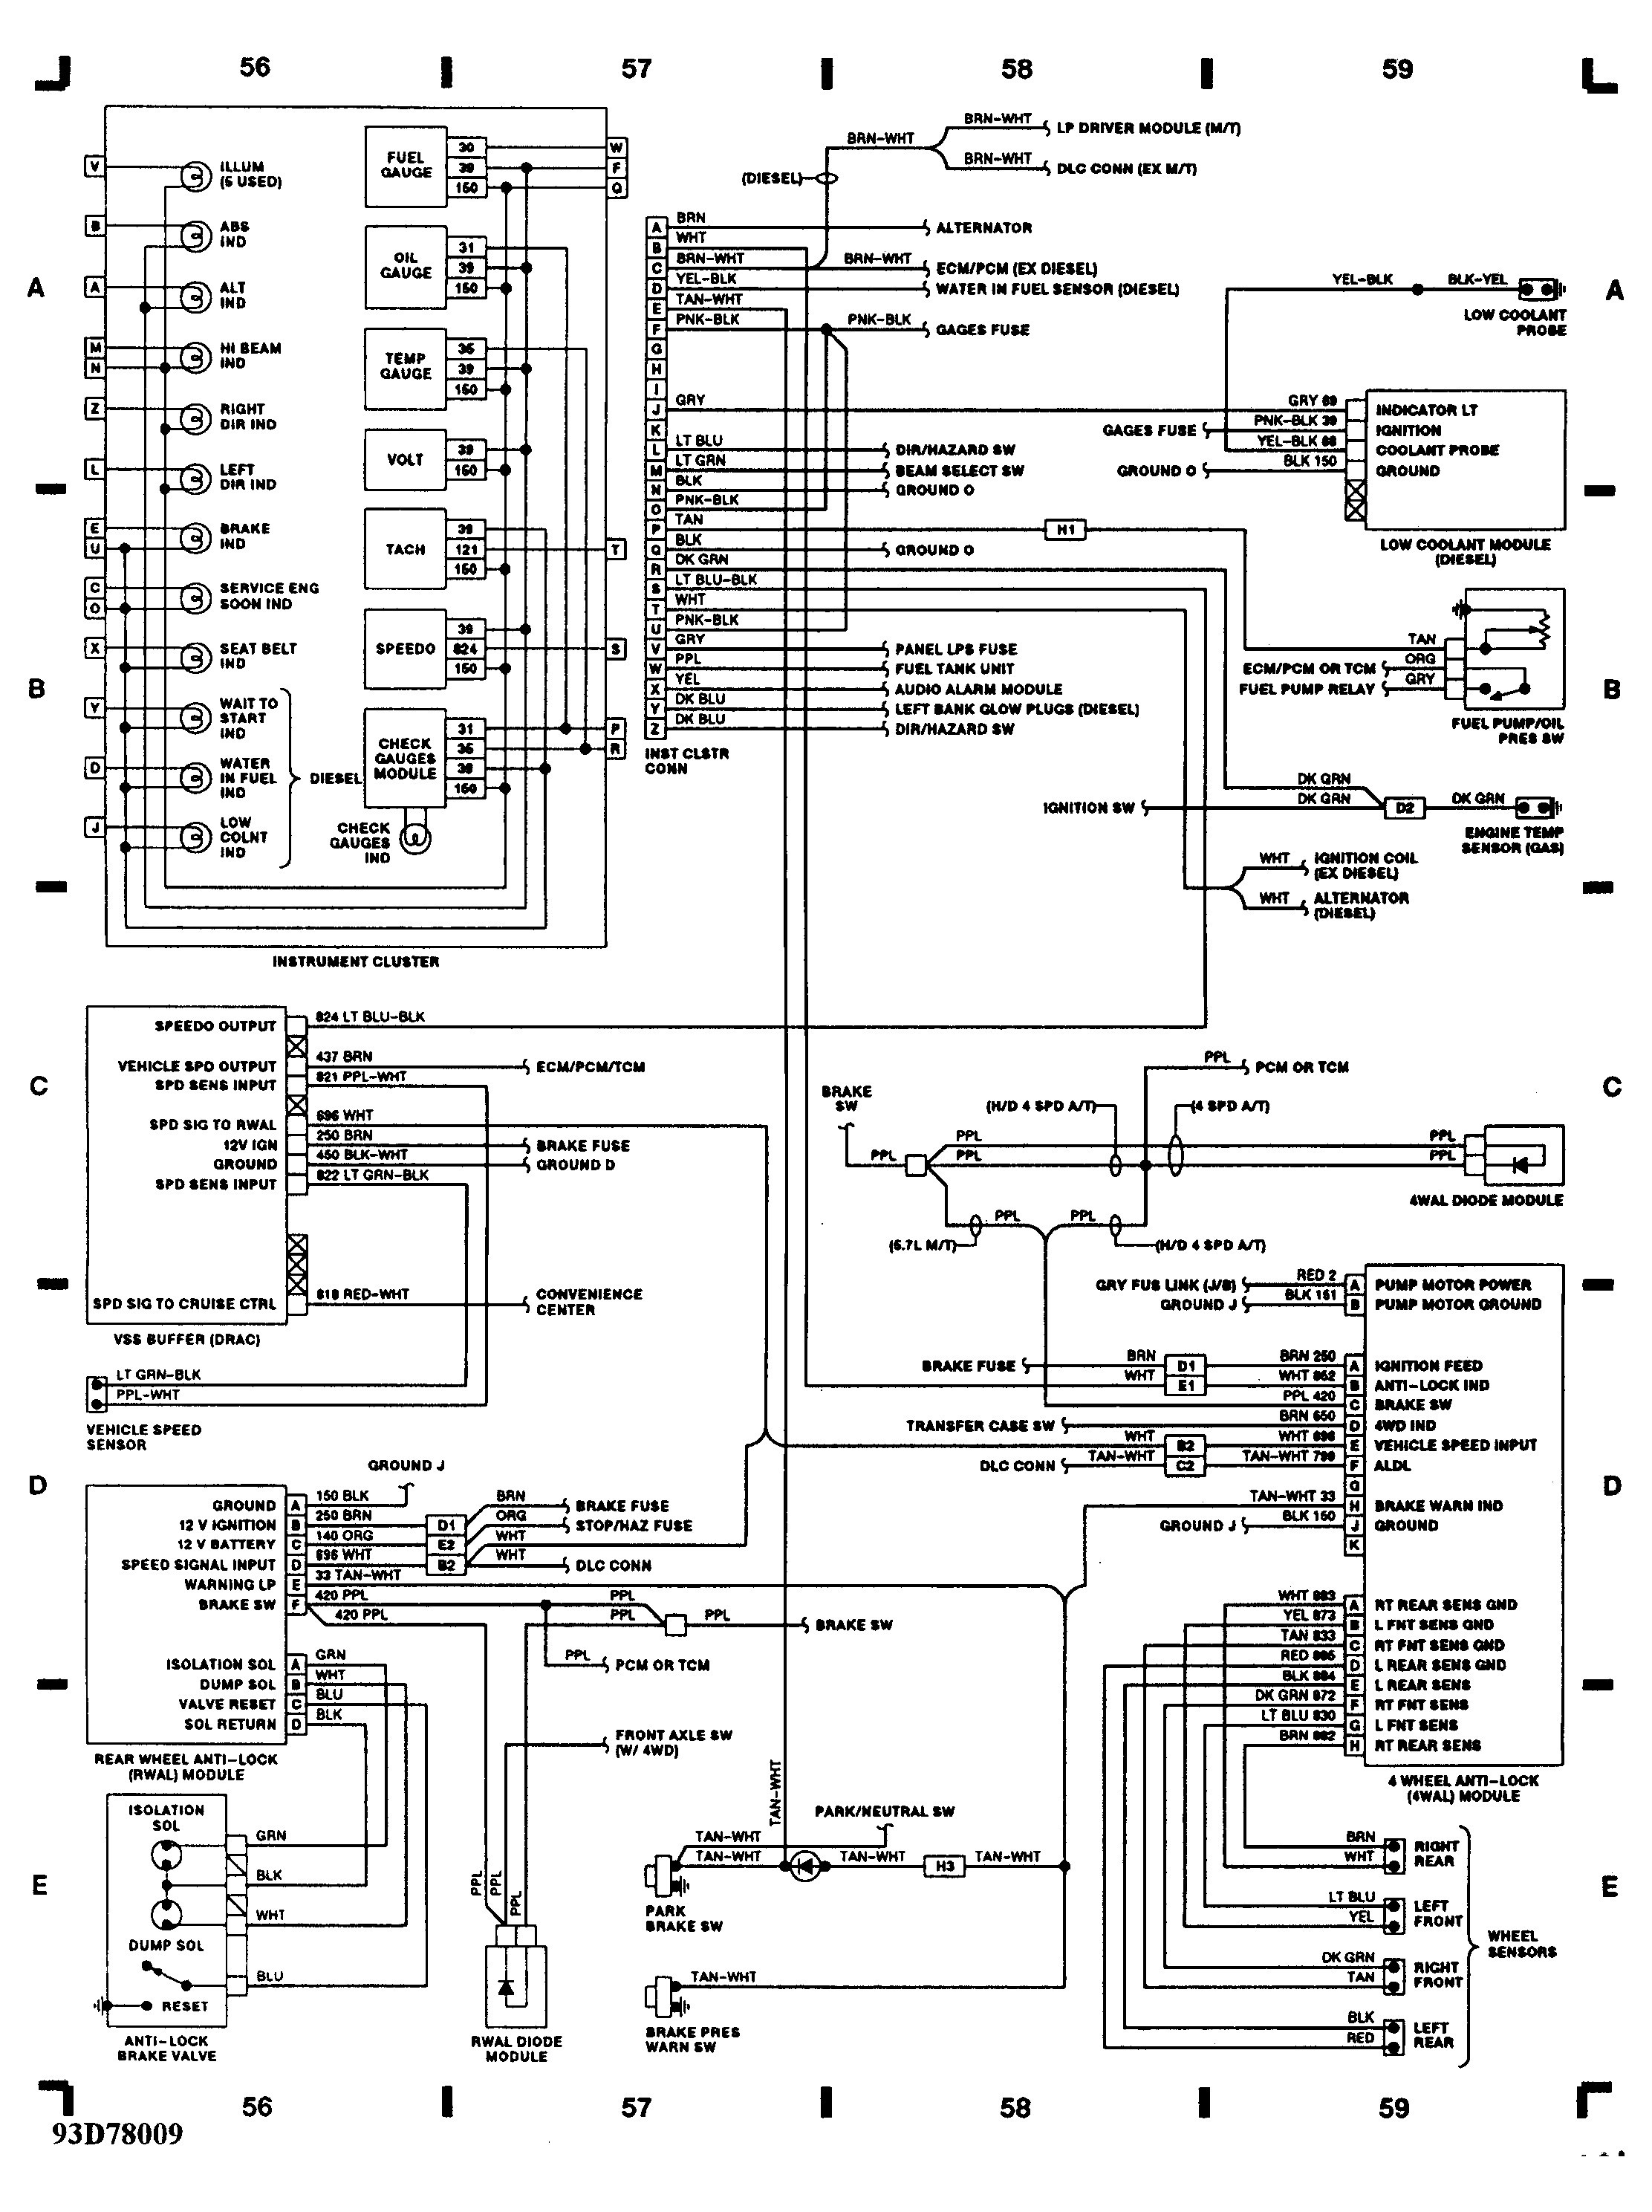 Car Wiring Harness Diagram Awesome 5 7 Vortec Wiring Harness Diagram Diagram